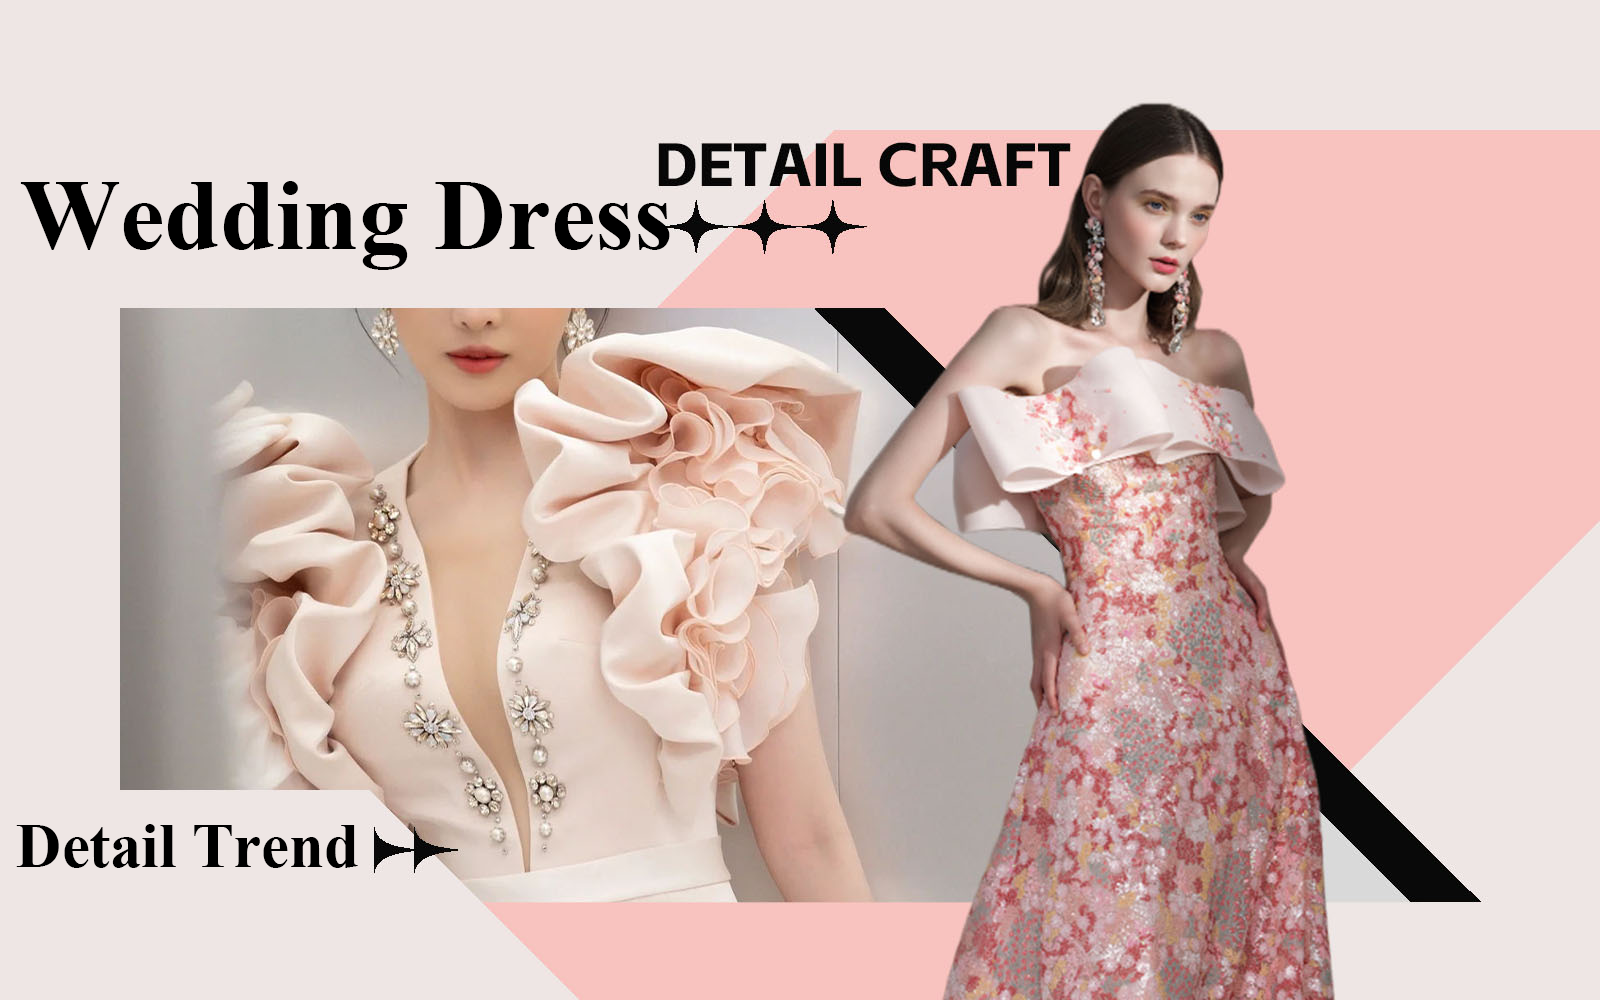 The Detail & Craft Trend for Women's Wedding Dress